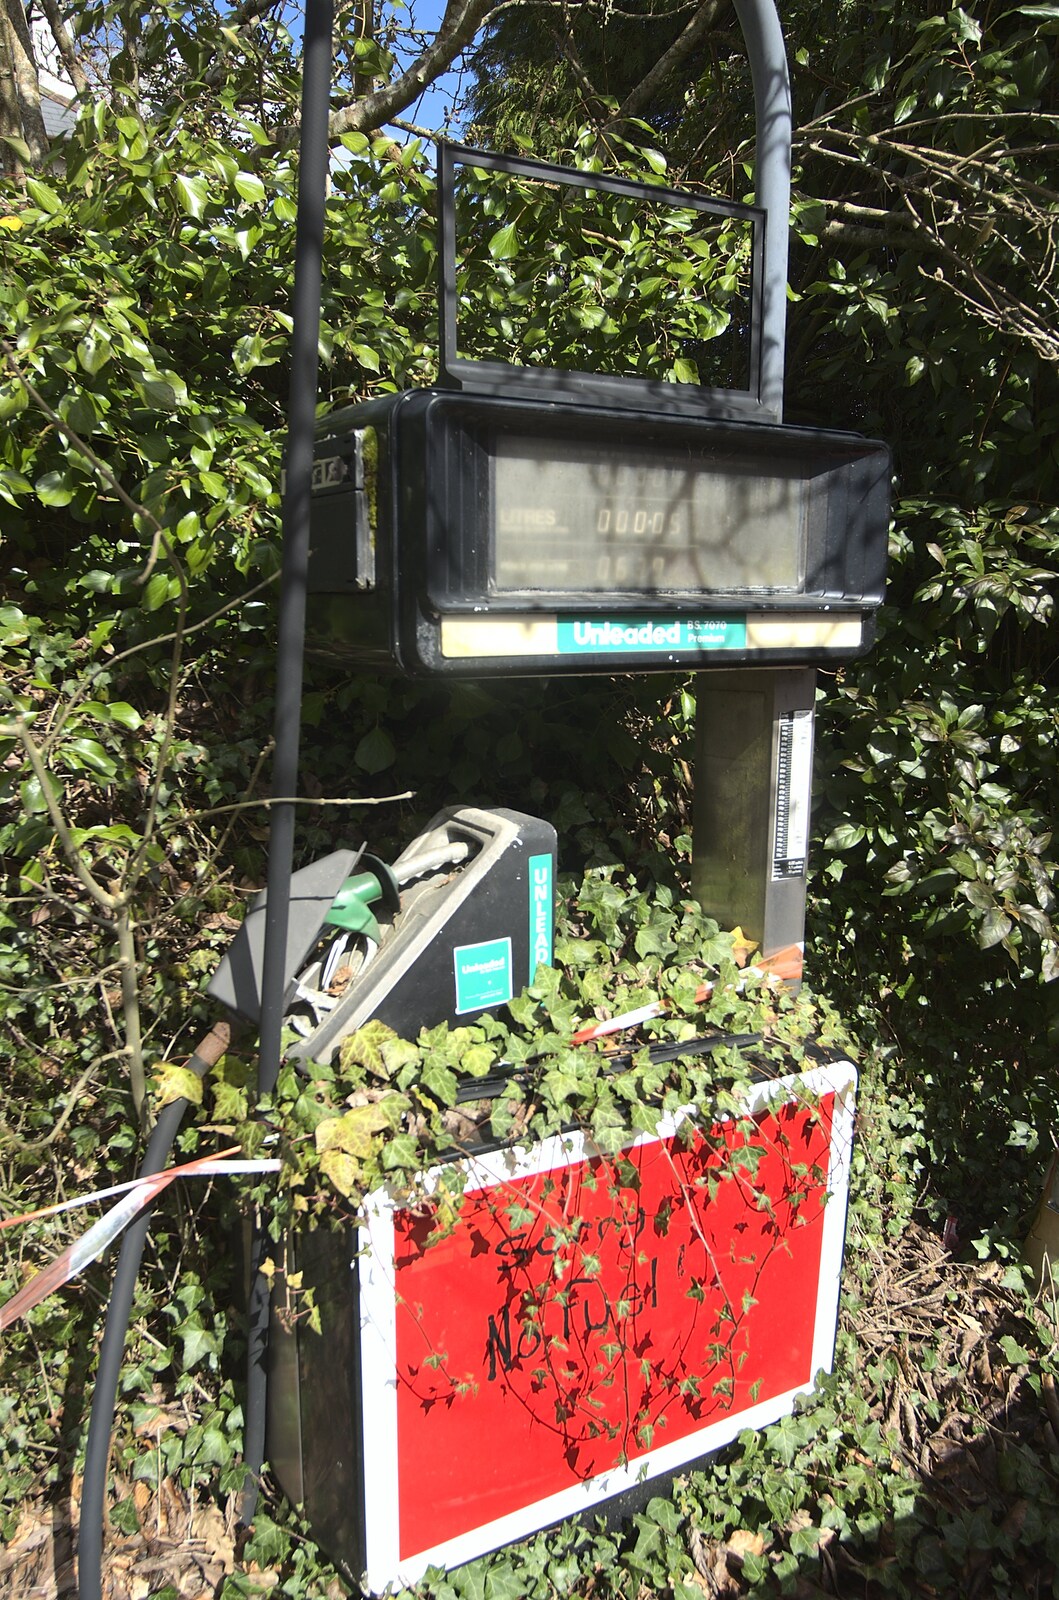 A derelict petrol pump in Moretonhampstead from Easter in Chagford and Hoo Meavy, Devon - 3rd April 2010